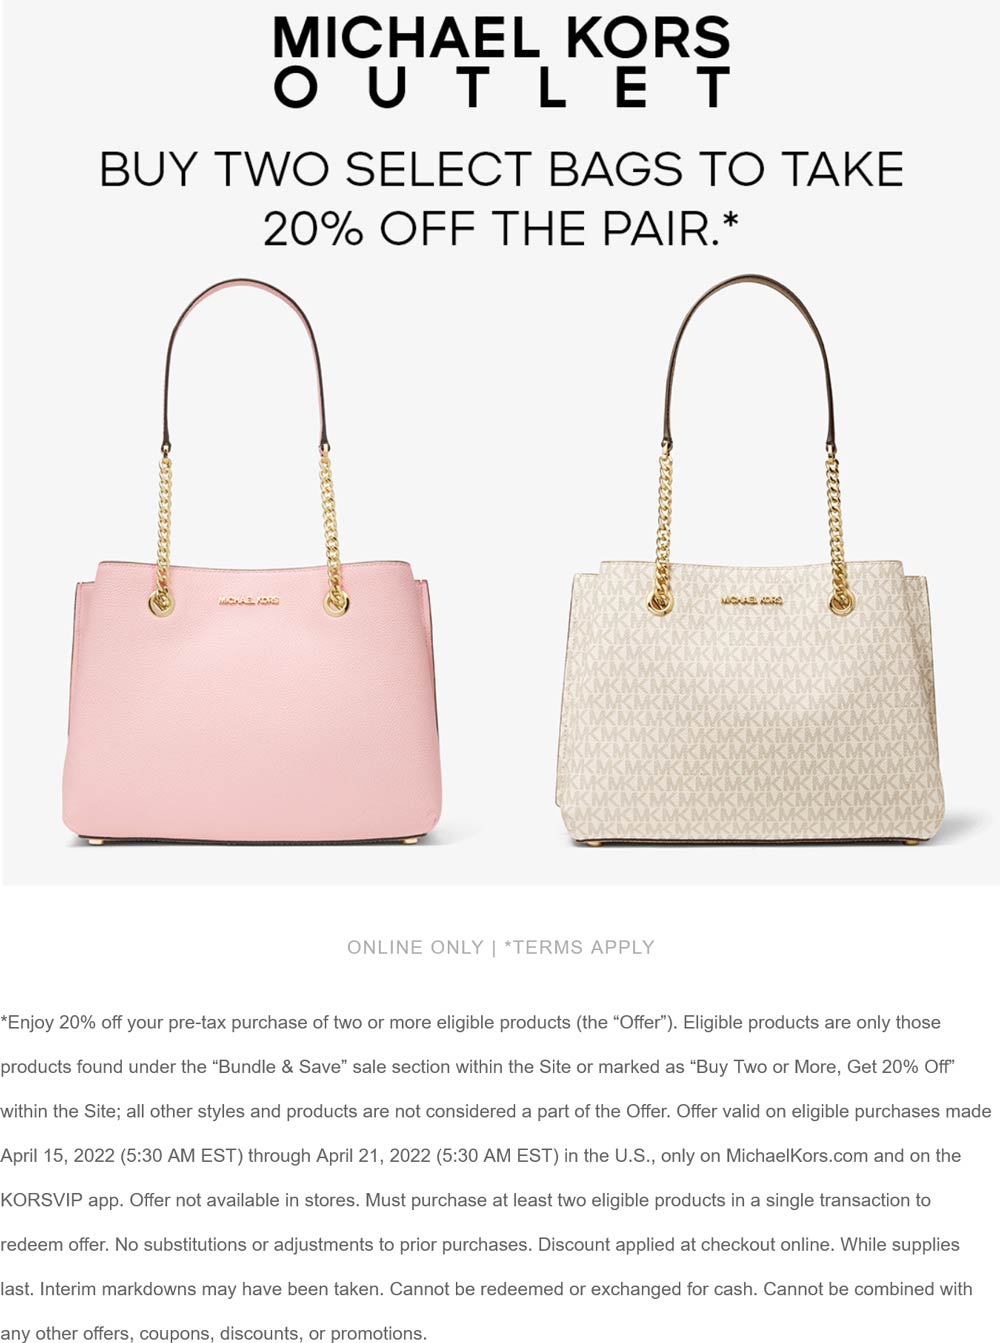 Michael Kors Outlet coupons & promo code for [November 2022]